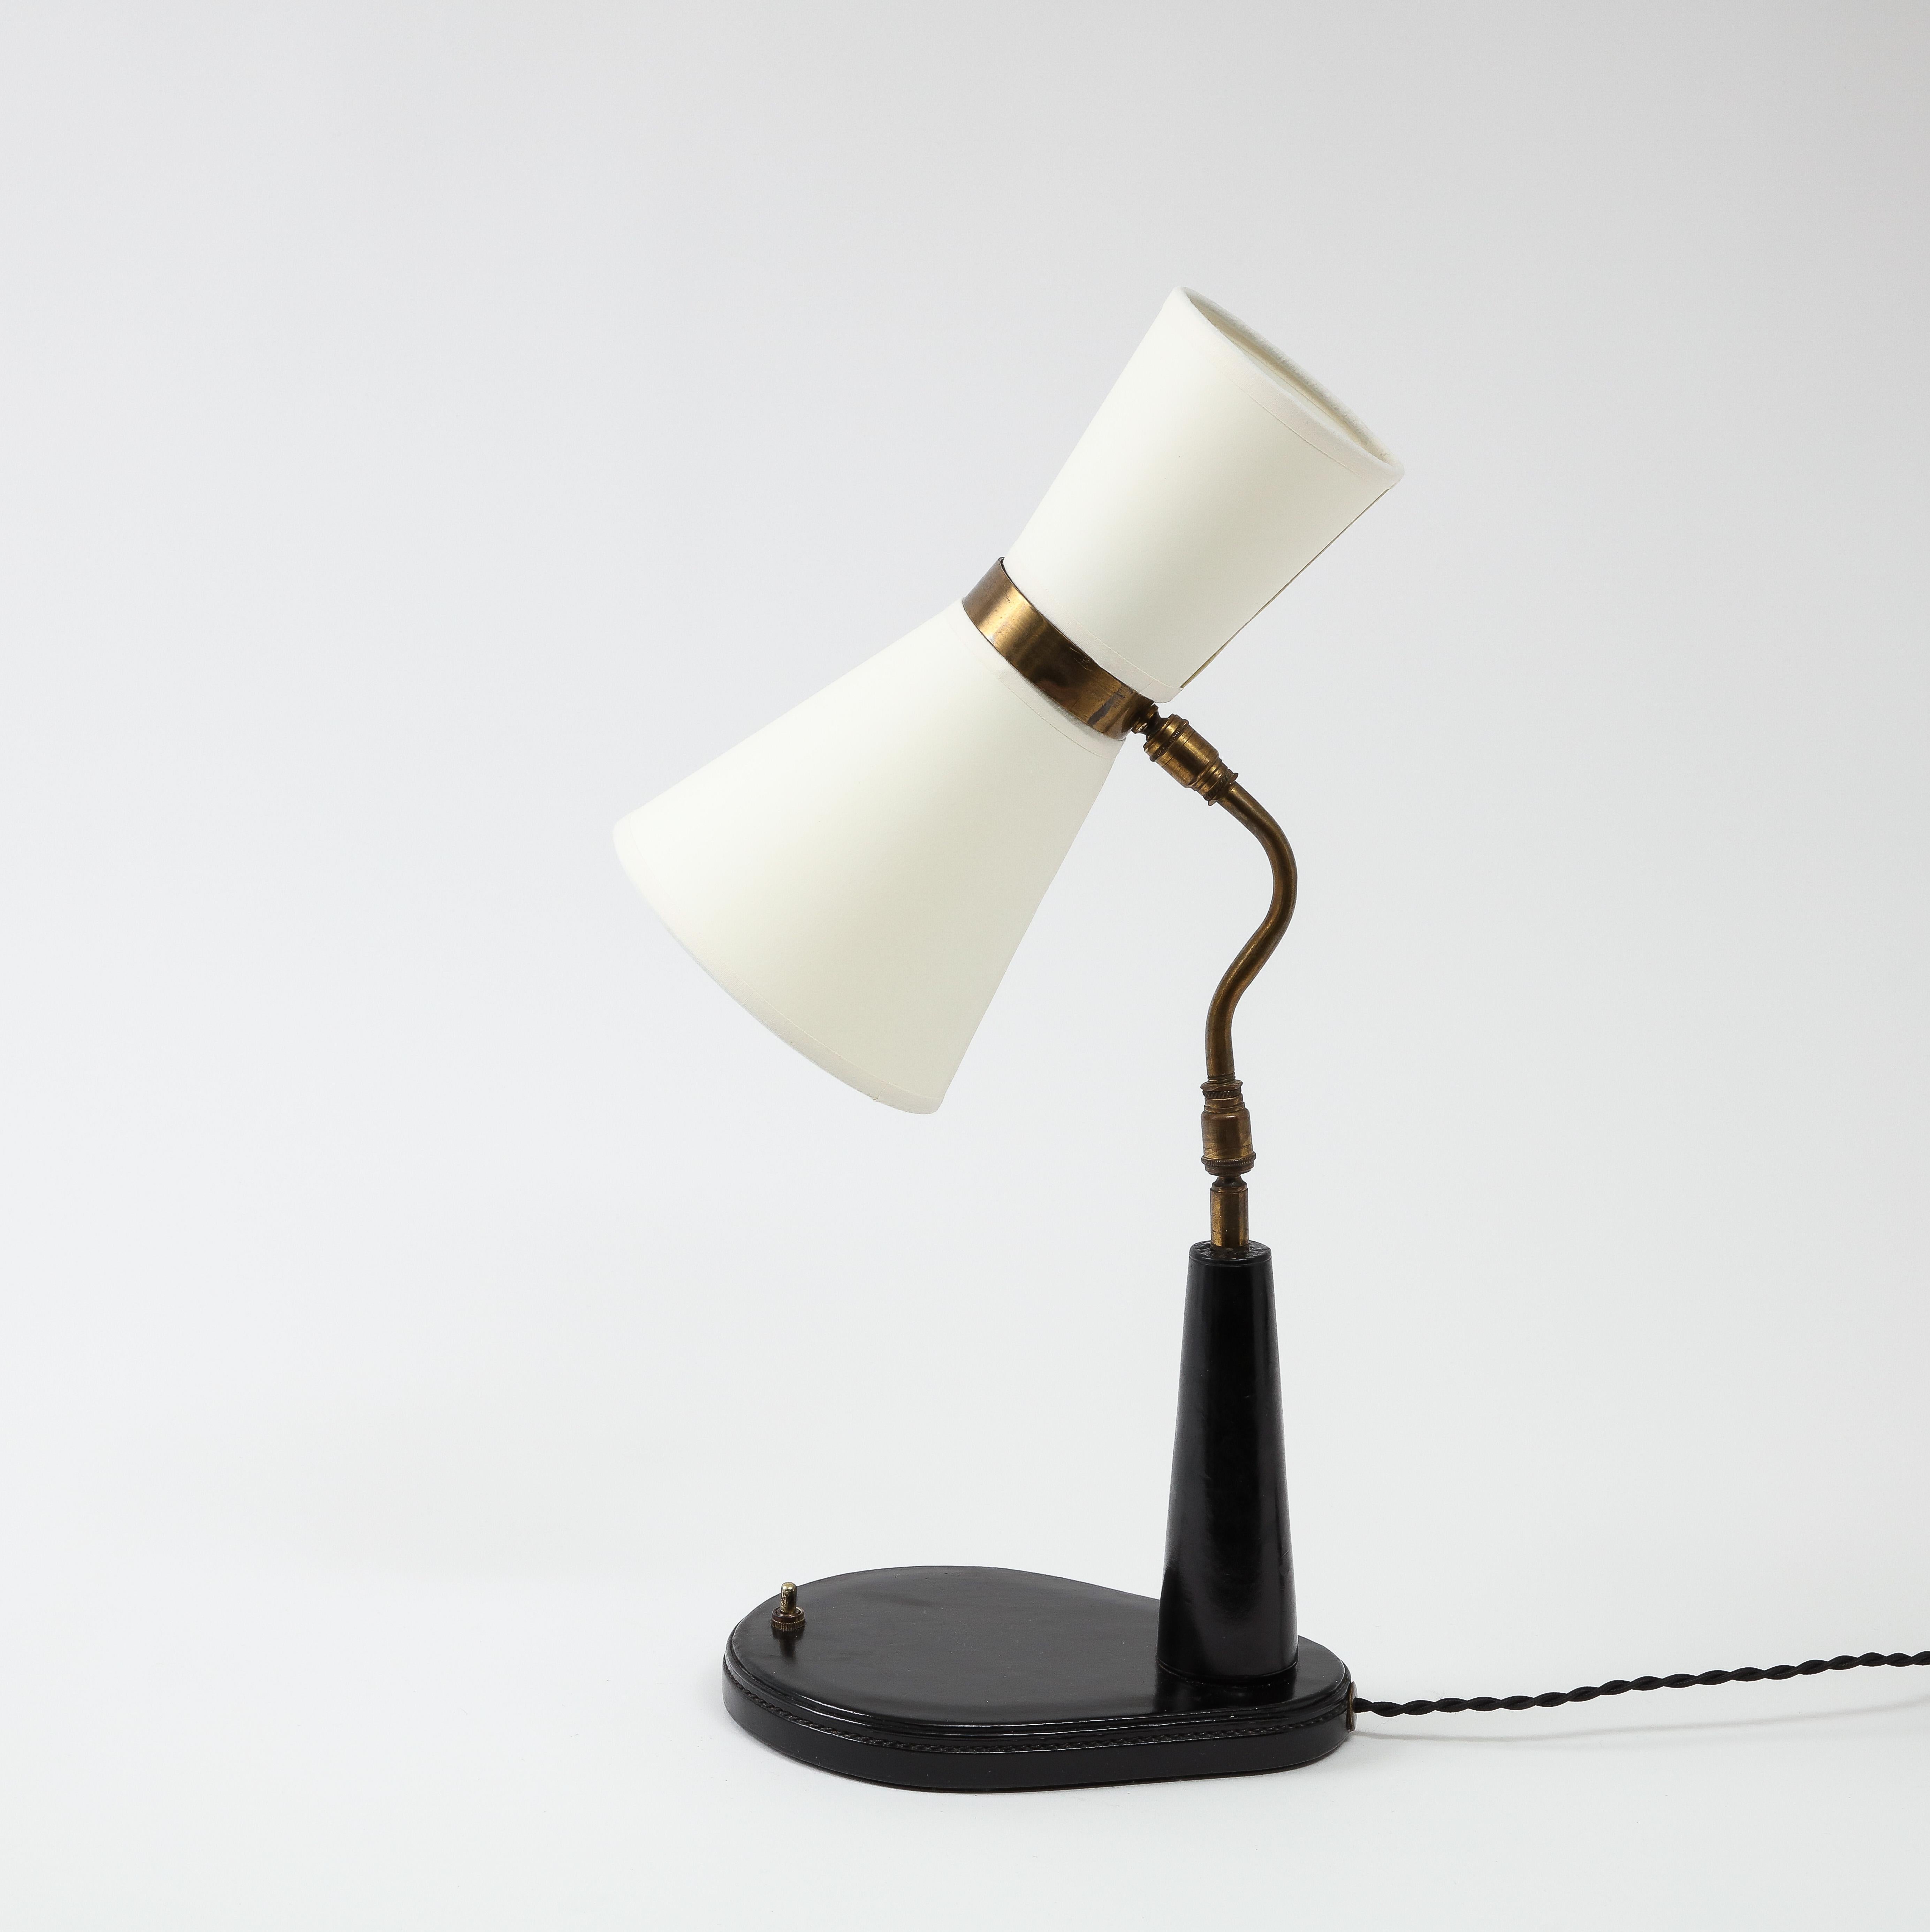 Lancel desk lamp in black leather with 3-way adjustable head. Custom shade included and rewired with a silk cord, a period style plug, and candelabra bulbs for 60W.